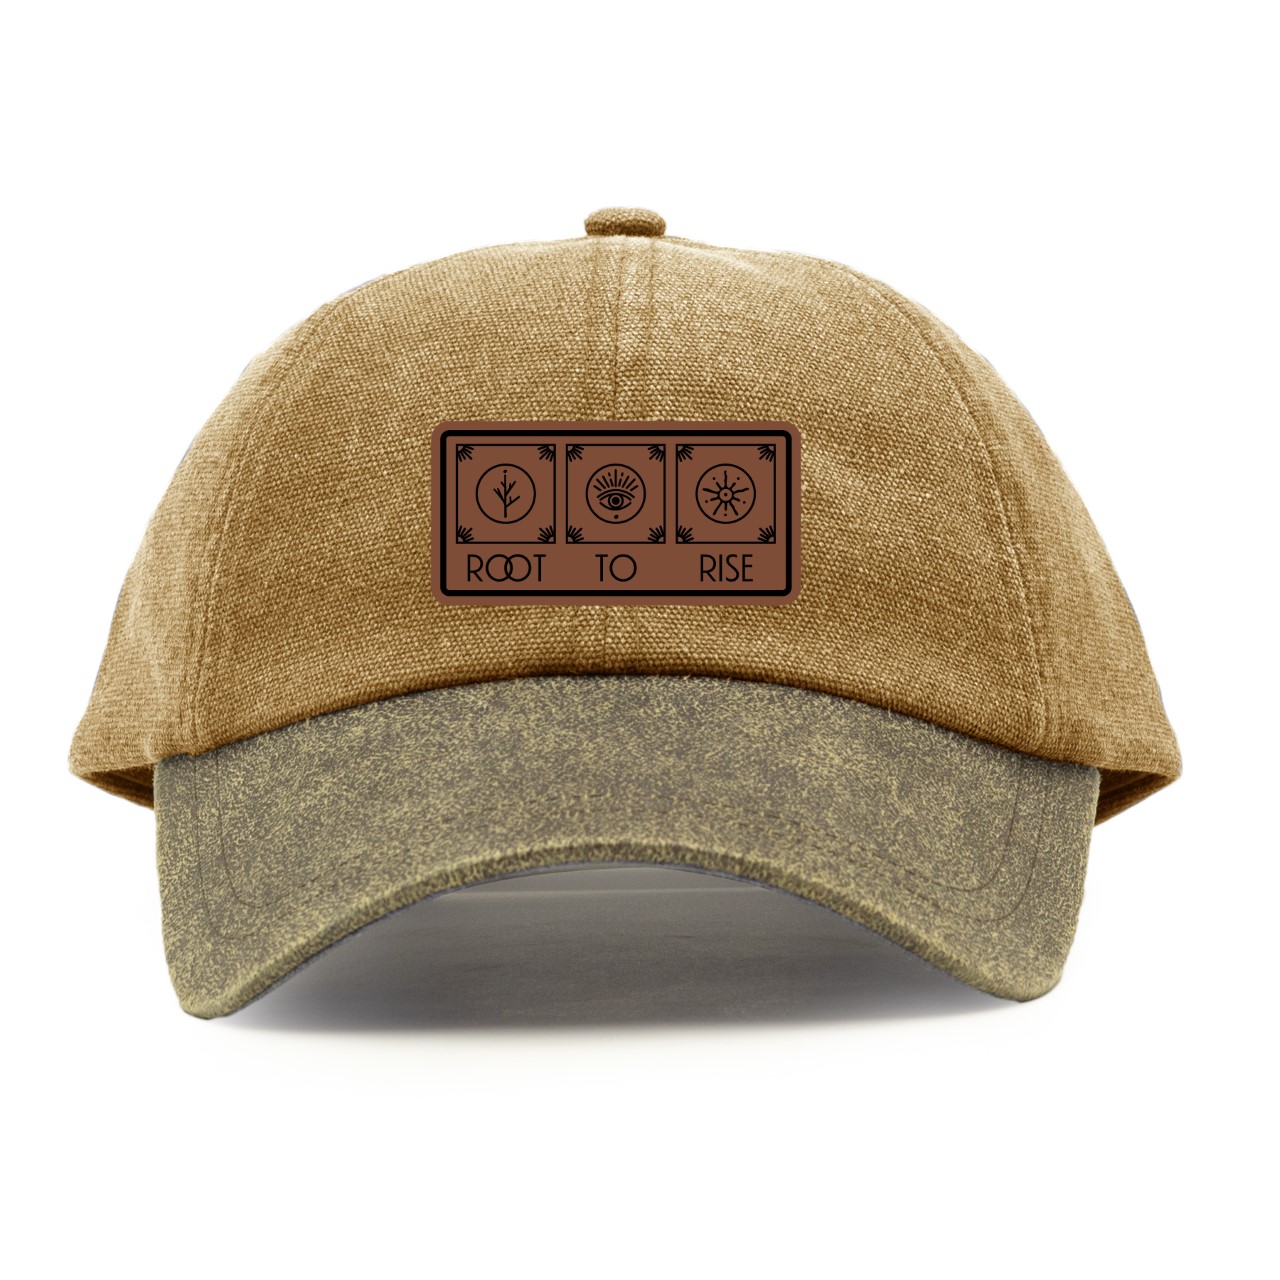 Root to Rise Yoga Cap Brown with logo